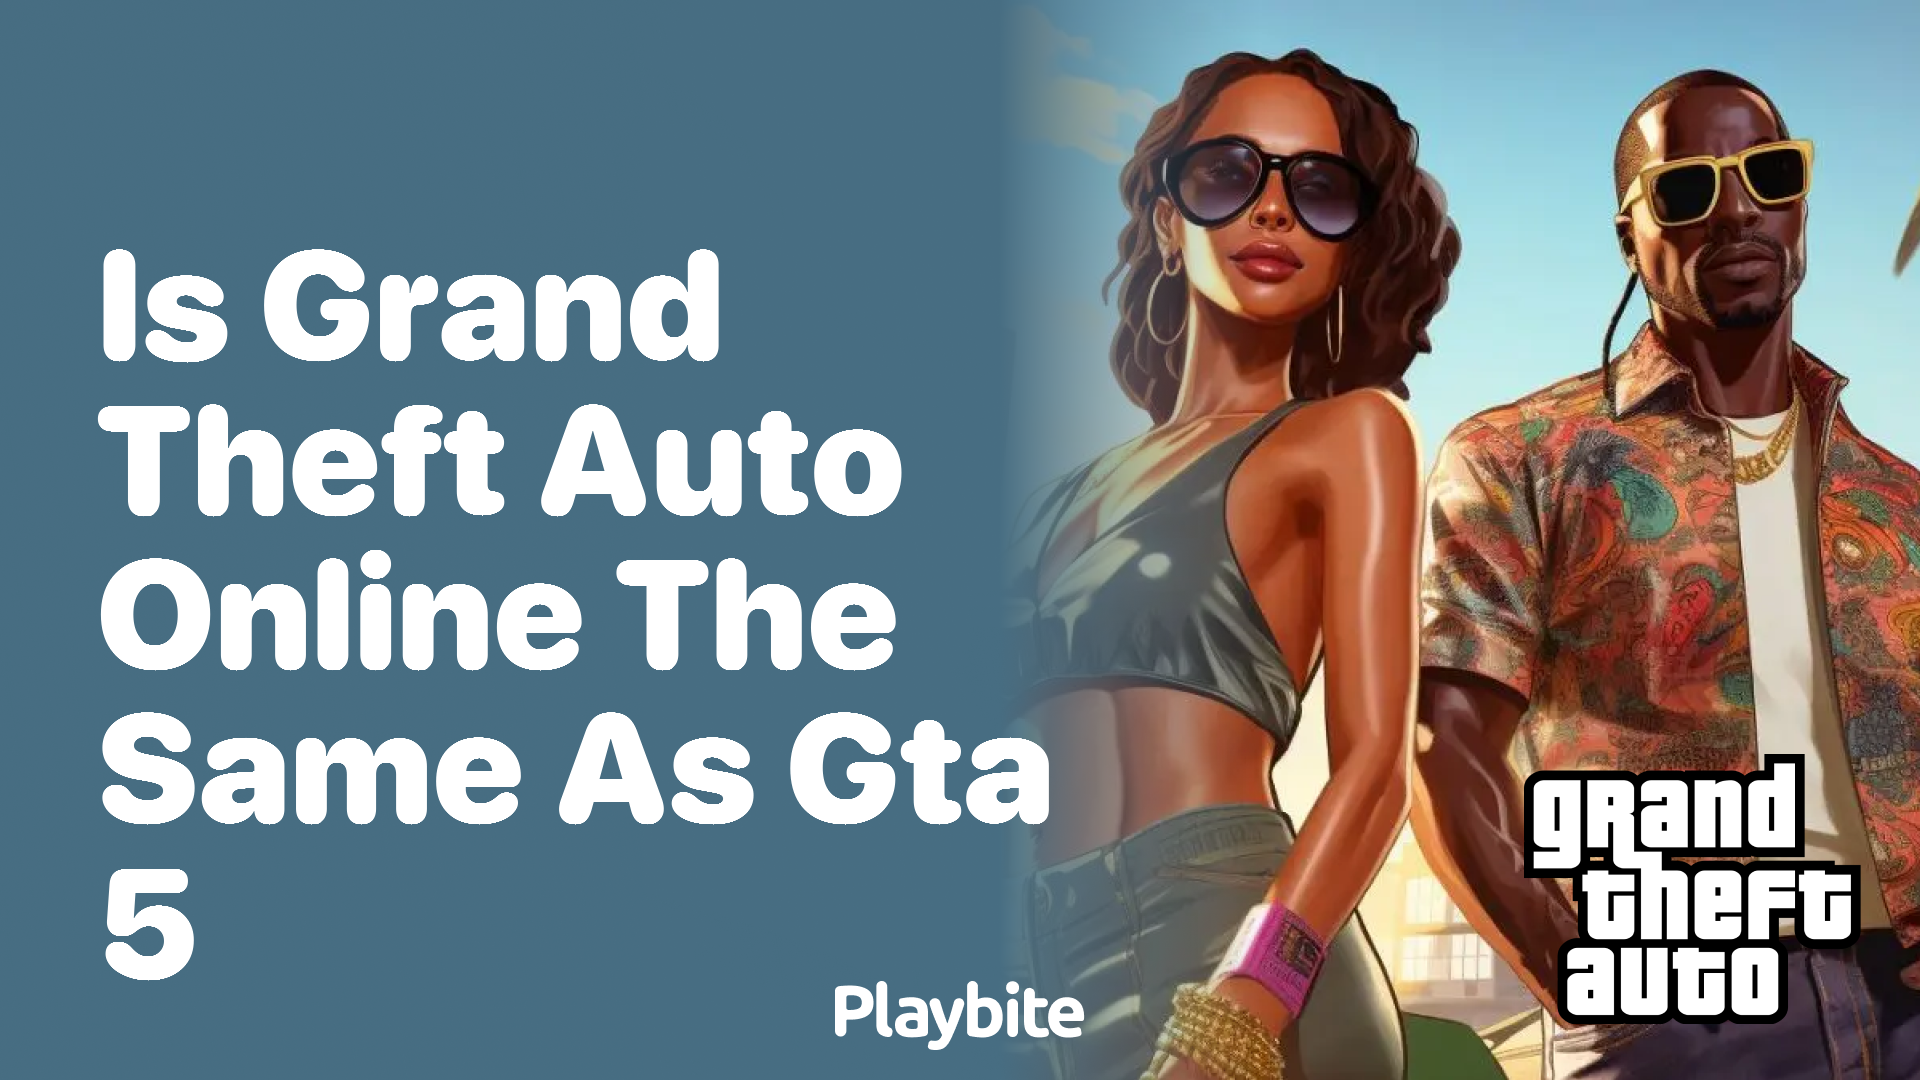 Is Grand Theft Auto Online the same as GTA 5?